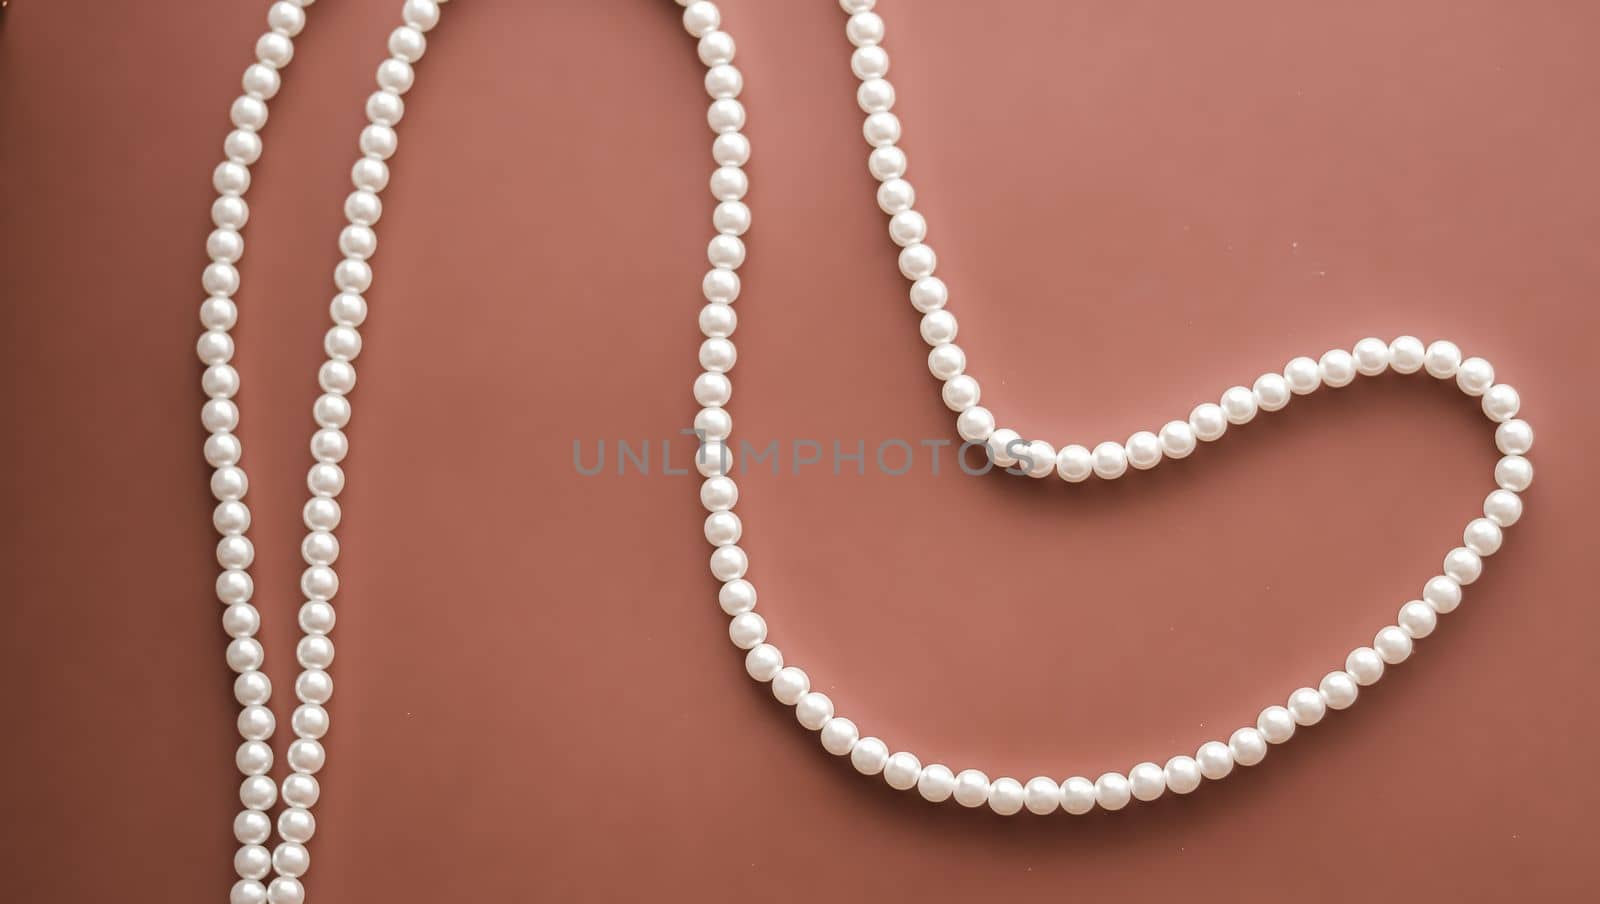 Pearl jewellery necklace on brown background.